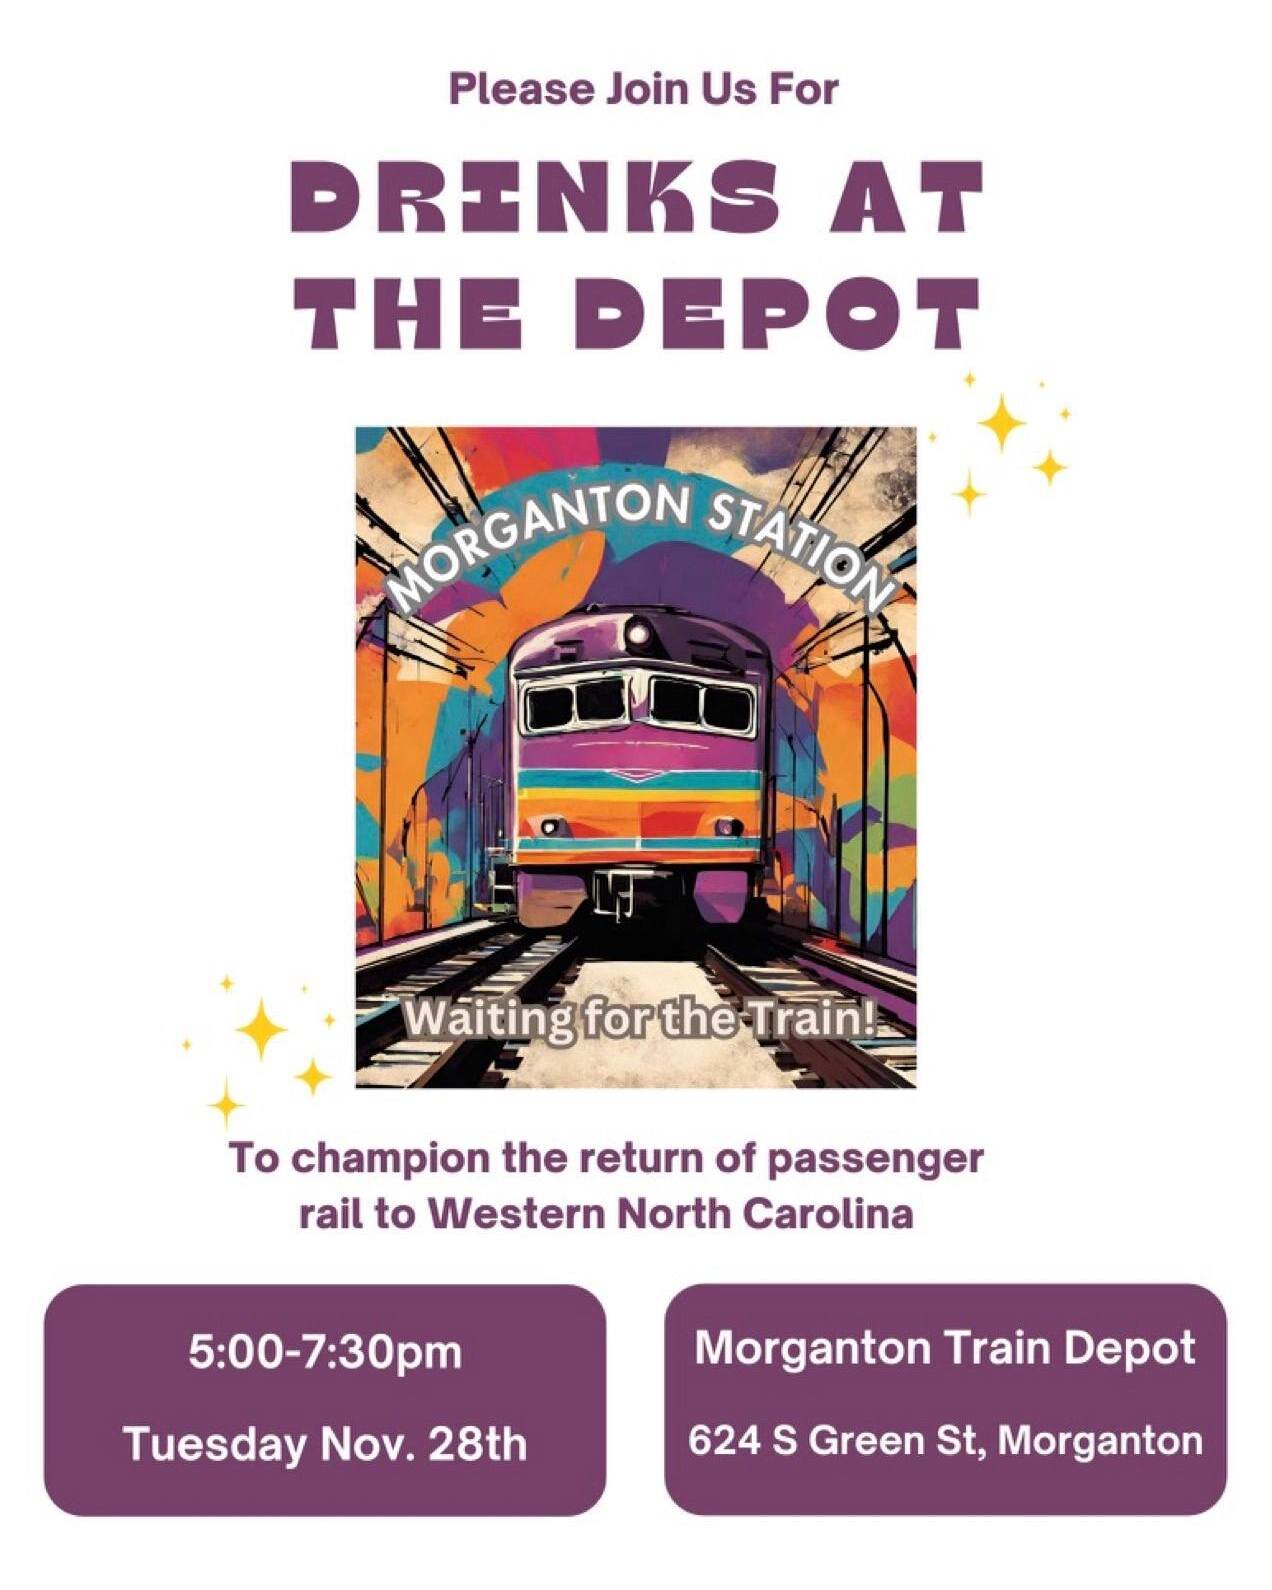 REMINDER: TODAY IS THE DAY!
We hope to see you this evening at the Morganton Depot for our Drinks at the Depot event!
You can stop by anytime from 5-7:30pm, although note we have speakers lined up for 5:30. NCDOT is sending a representative from Rale